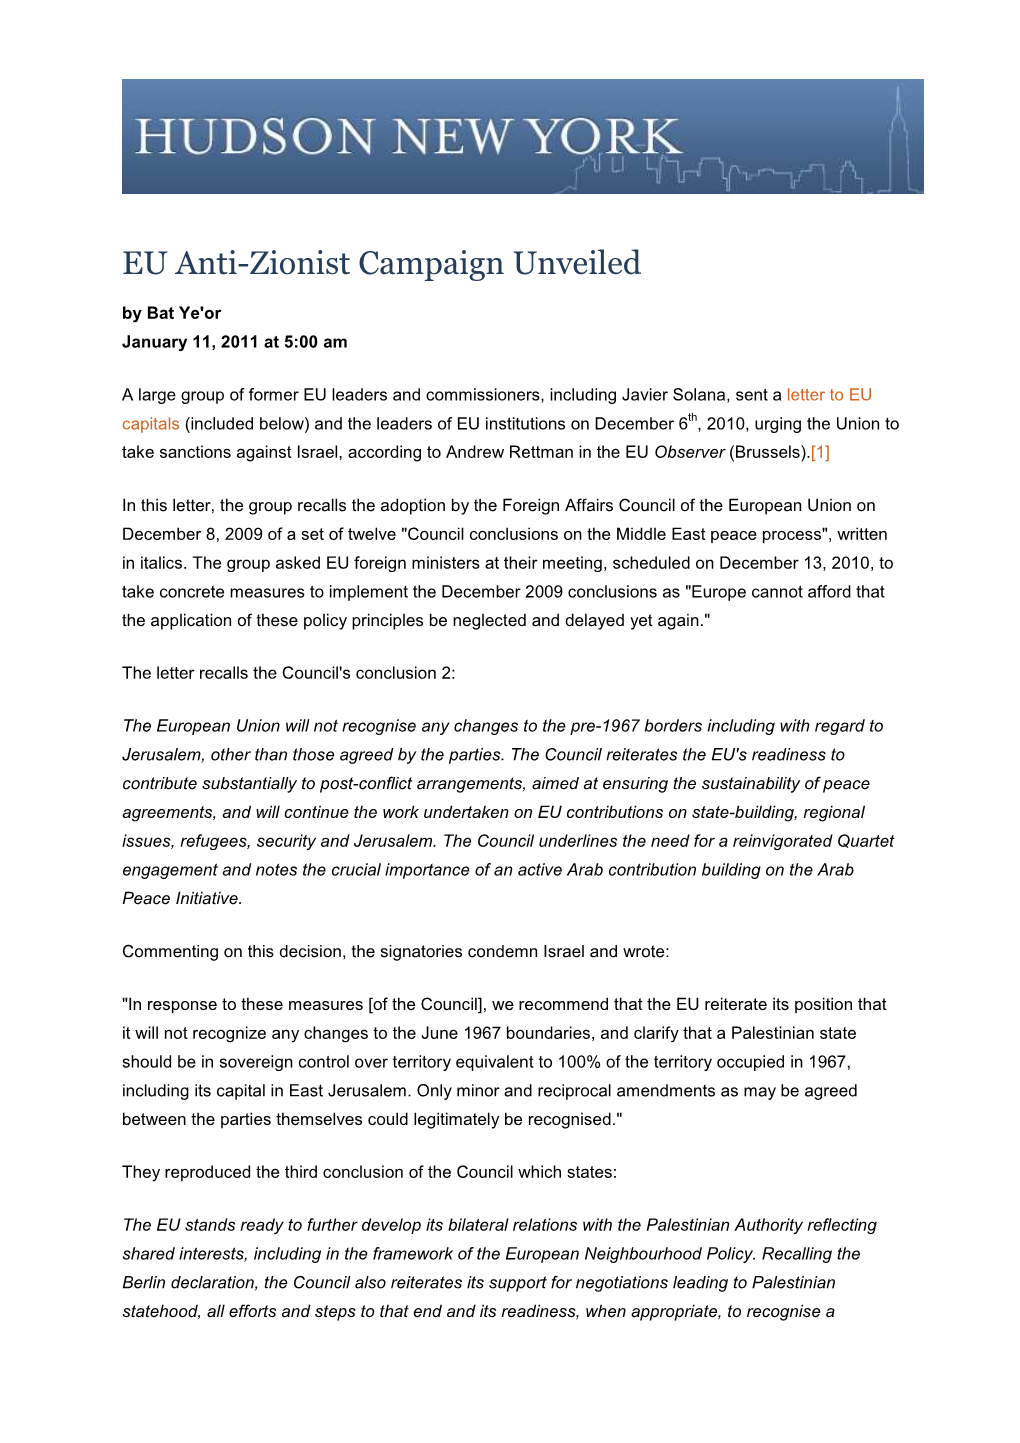 EU Anti-Zionist Campaign Unveiled by Bat Ye'or January 11, 2011 at 5:00 Am